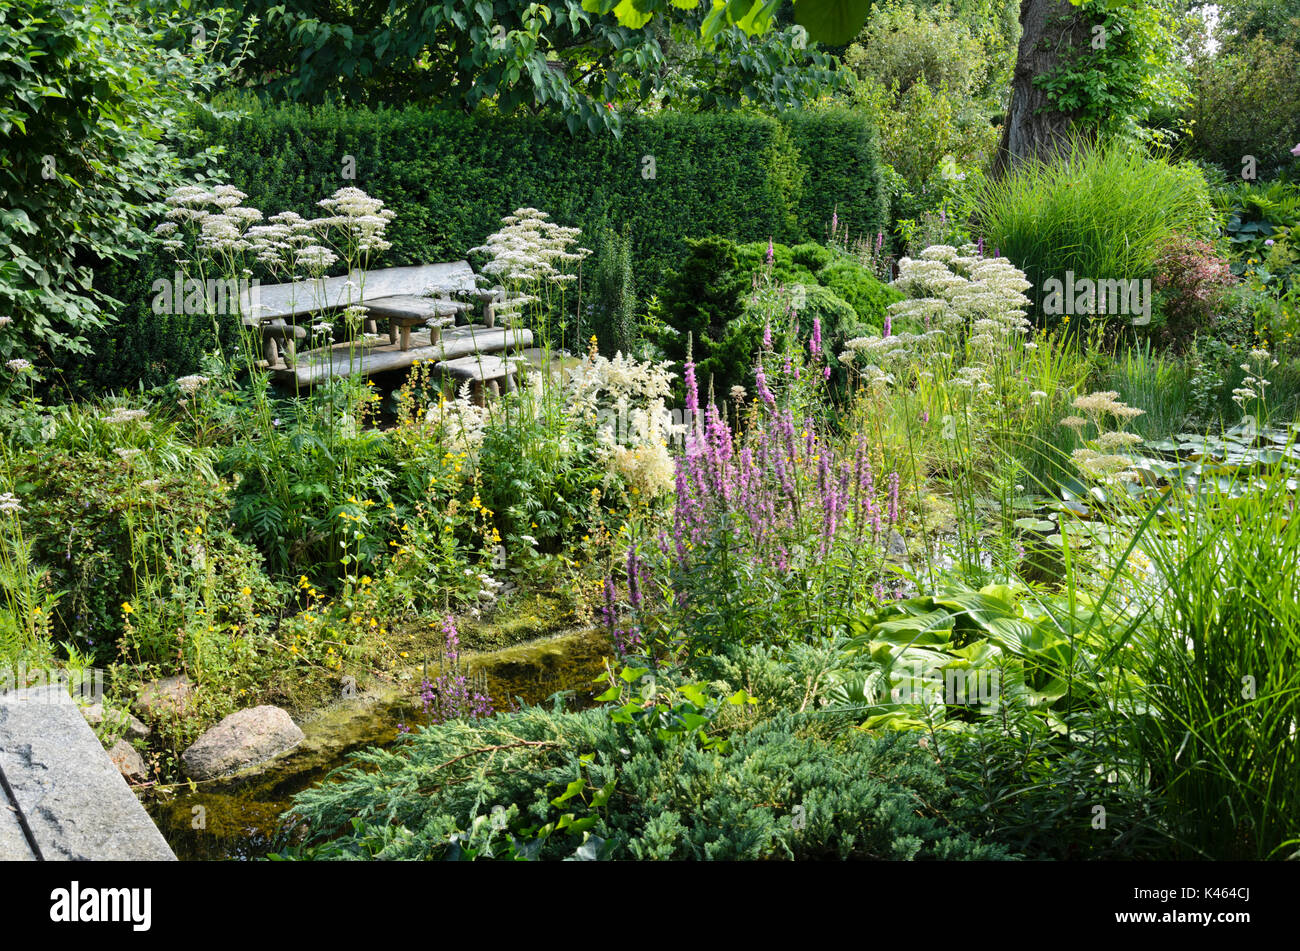 Common valerian (Valeriana officinalis) and loosestrifes (Lythrum) at a garden pond. Design: Marianne and Detlef Lüdke Stock Photo